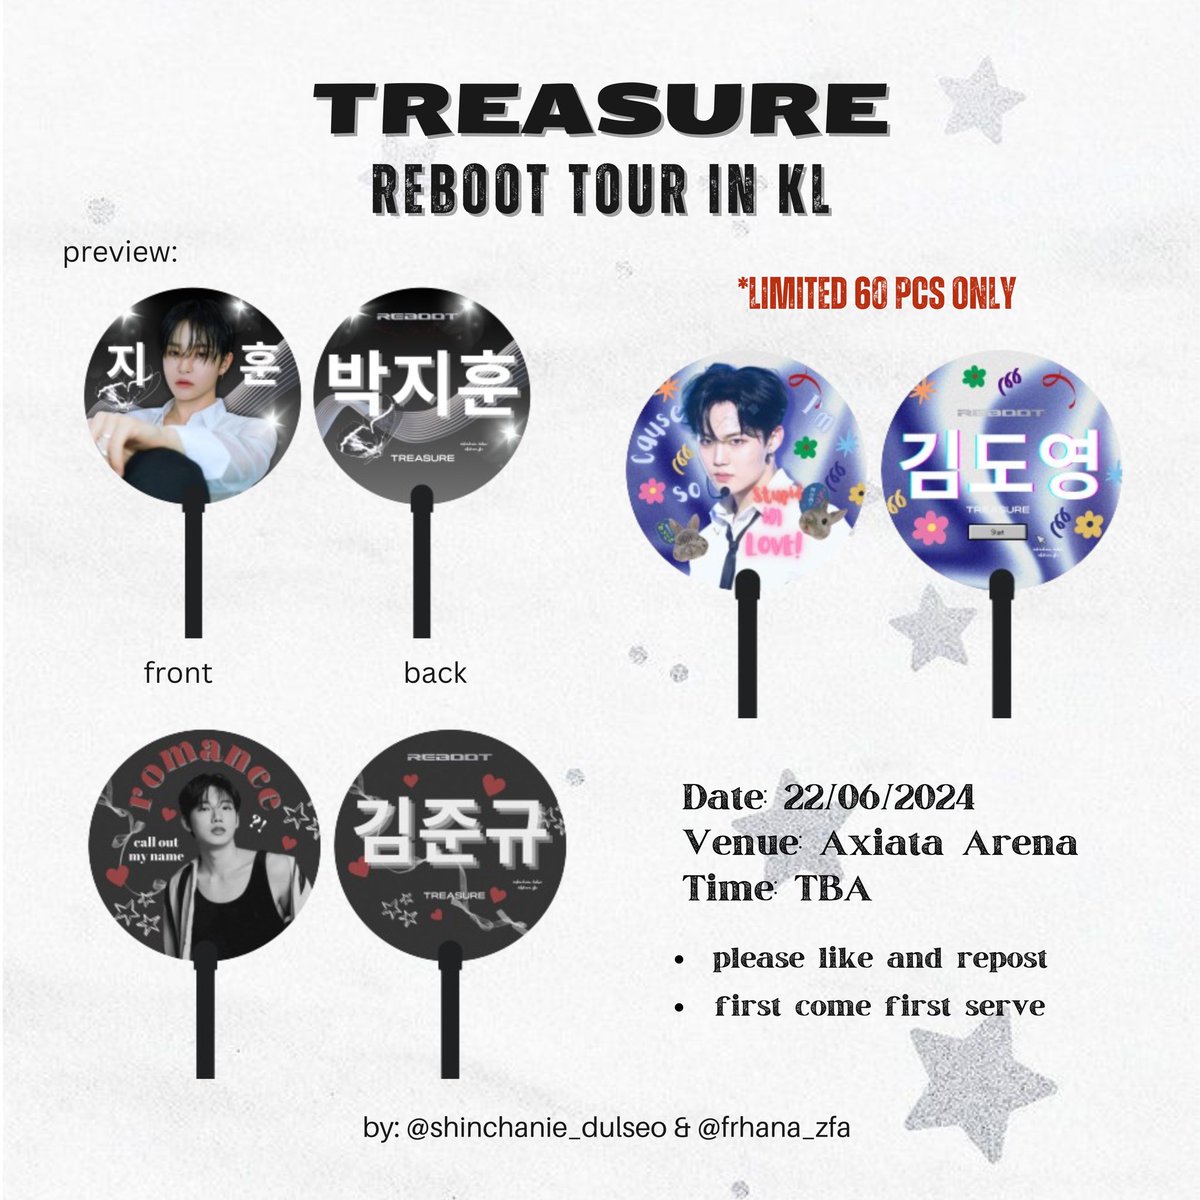 💎Freebies TREASURE Reboot Relay in KL 🇲🇾 

✧ like & rt
✧ say hi on D-Day
✧ do tag @shinchanie_dulseo on ig/ @frhana_zfa on X
✧ i’ll update @ D-Day time/place i’ll be distribute the freebies

see you all there 🩵

#TREASURE_REBOOT_IN_KUALALUMPUR #TREASUREinKL #REBOOTinKL